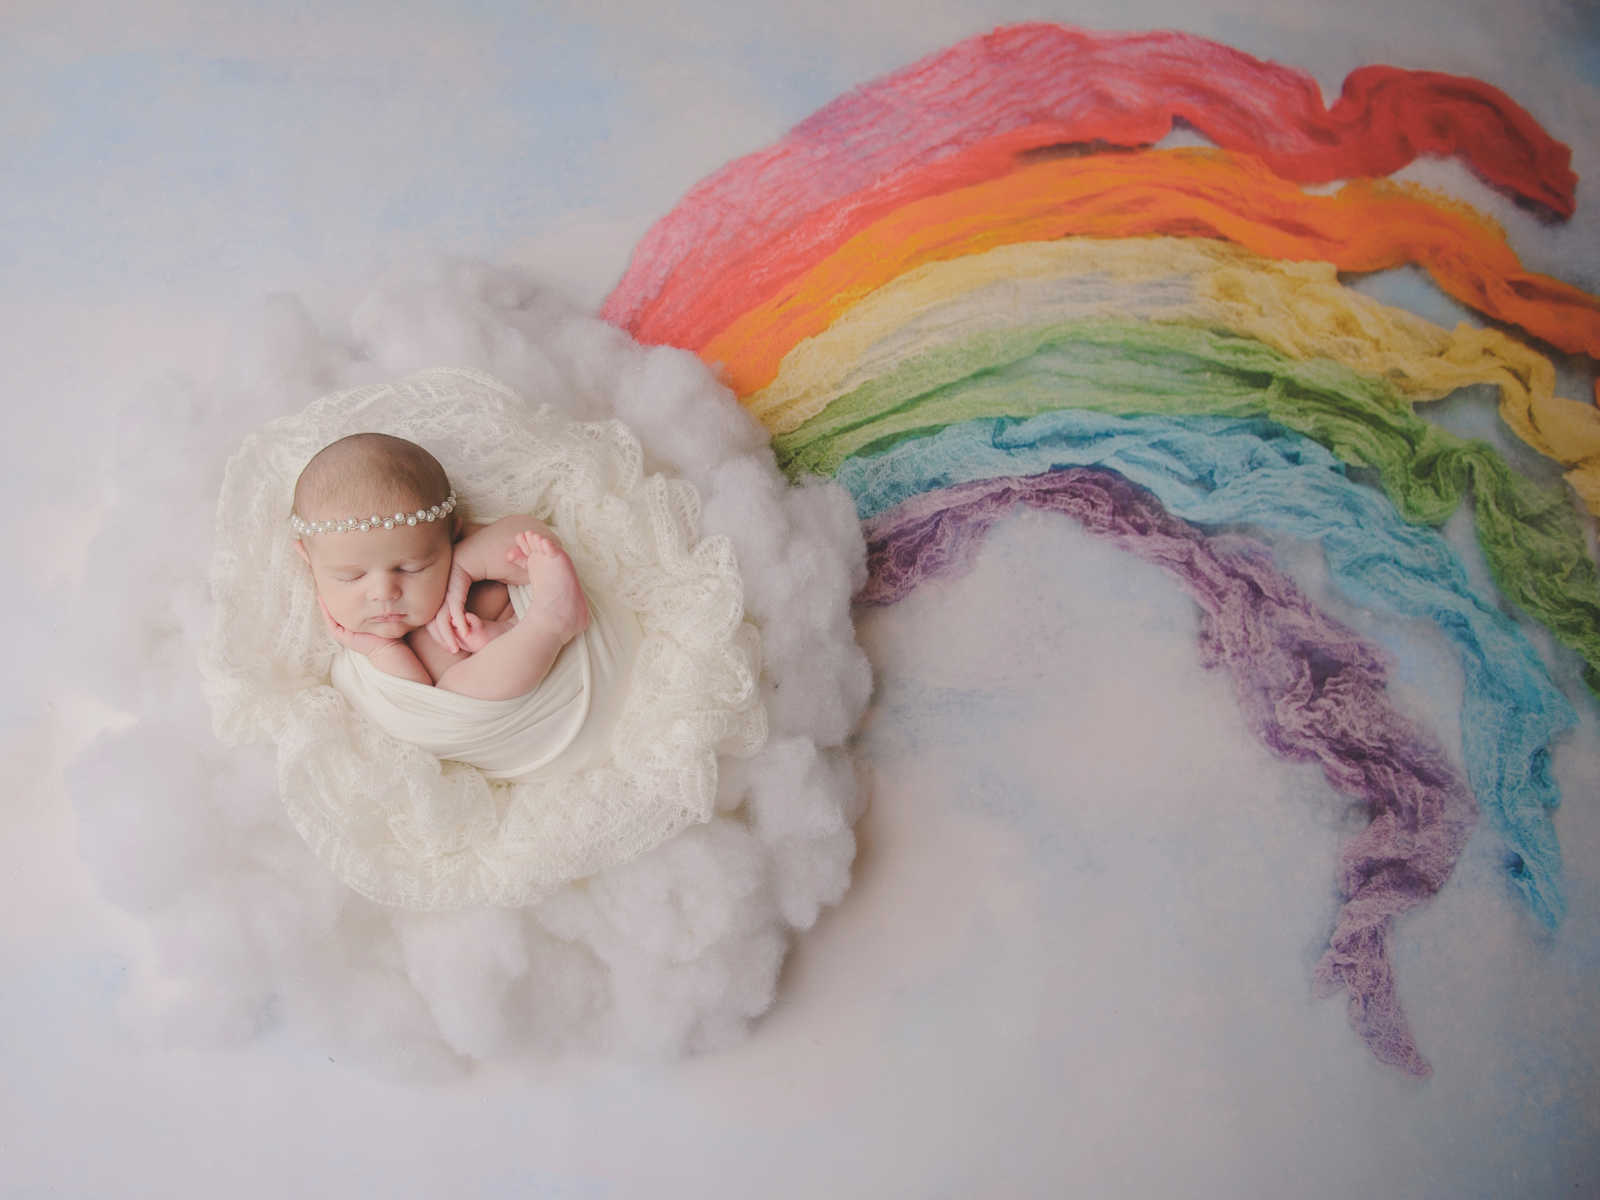 IVF baby asleep in white blanket at end of rainbow